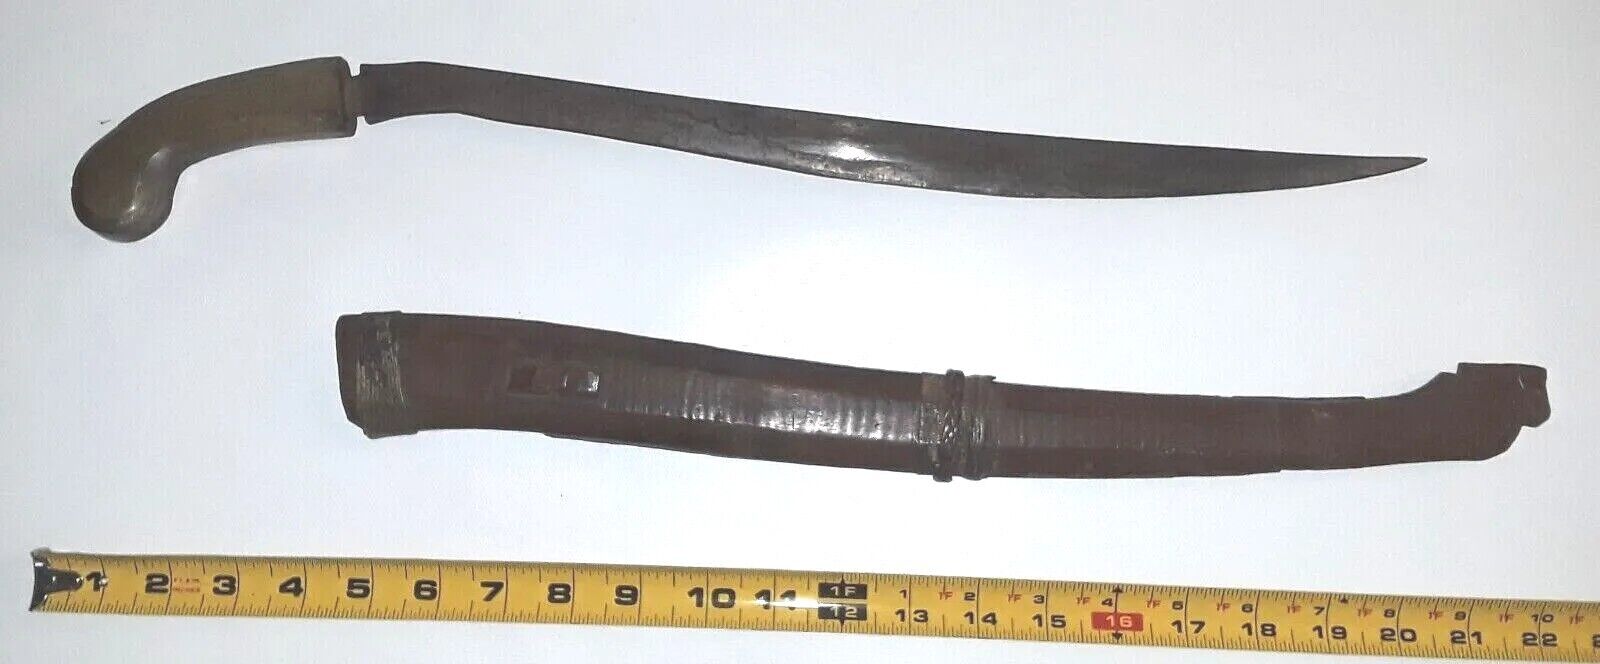 Knife Filipino sword Philippines Wood Antique Scabbard Military